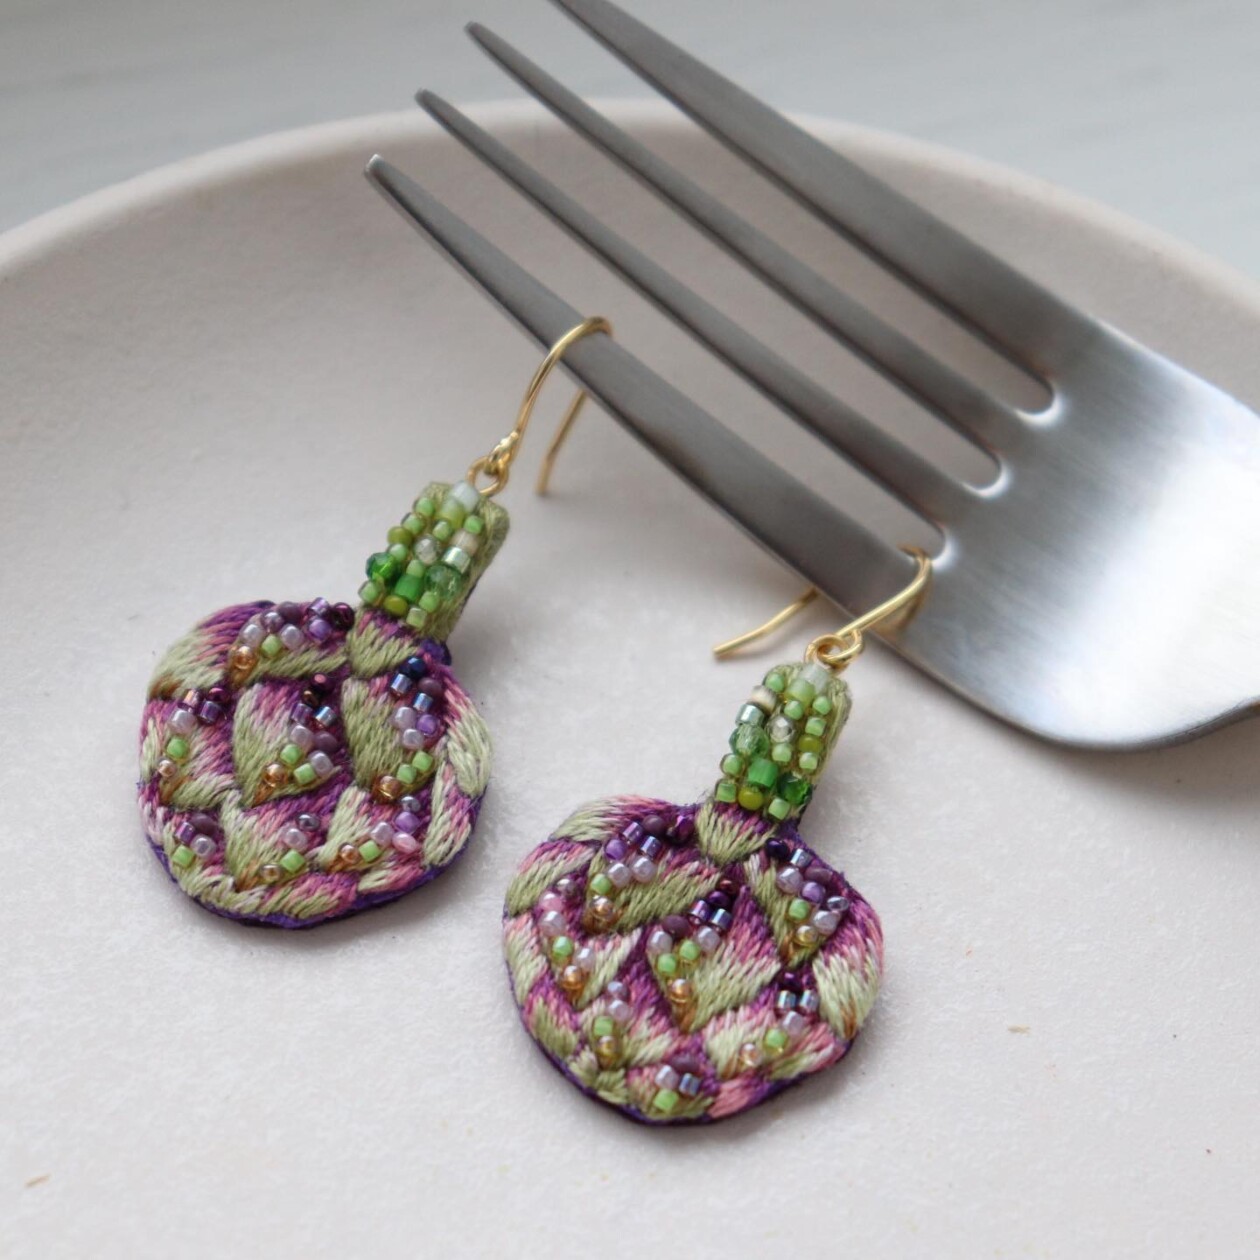 Eye Catching Handmade Embroidered Earrings By Vivaembr (15)